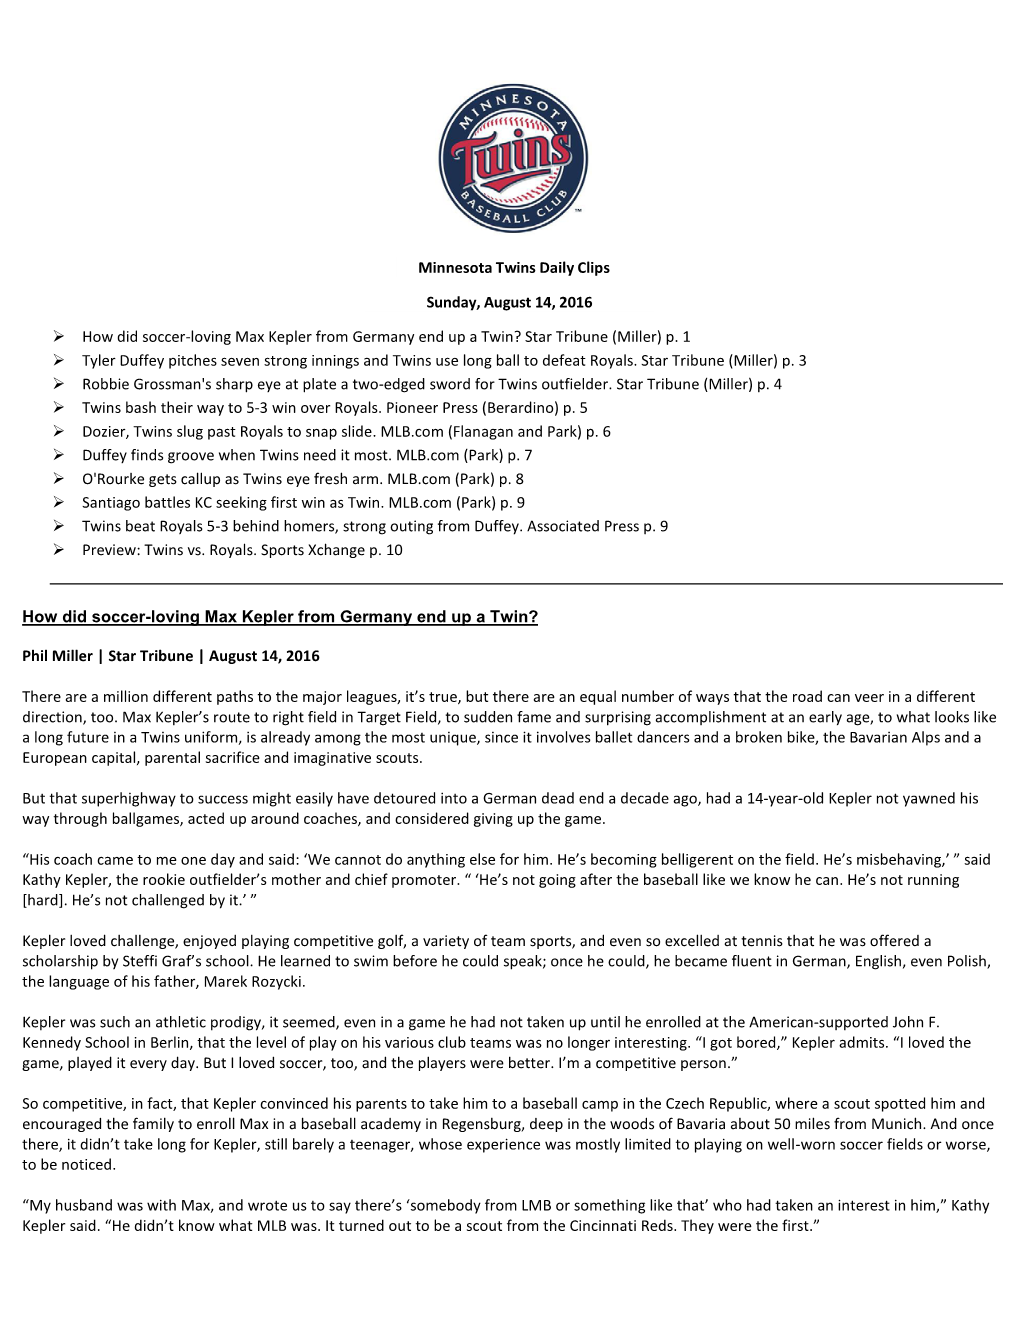 Minnesota Twins Daily Clips Sunday, August 14, 2016 How Did Soccer